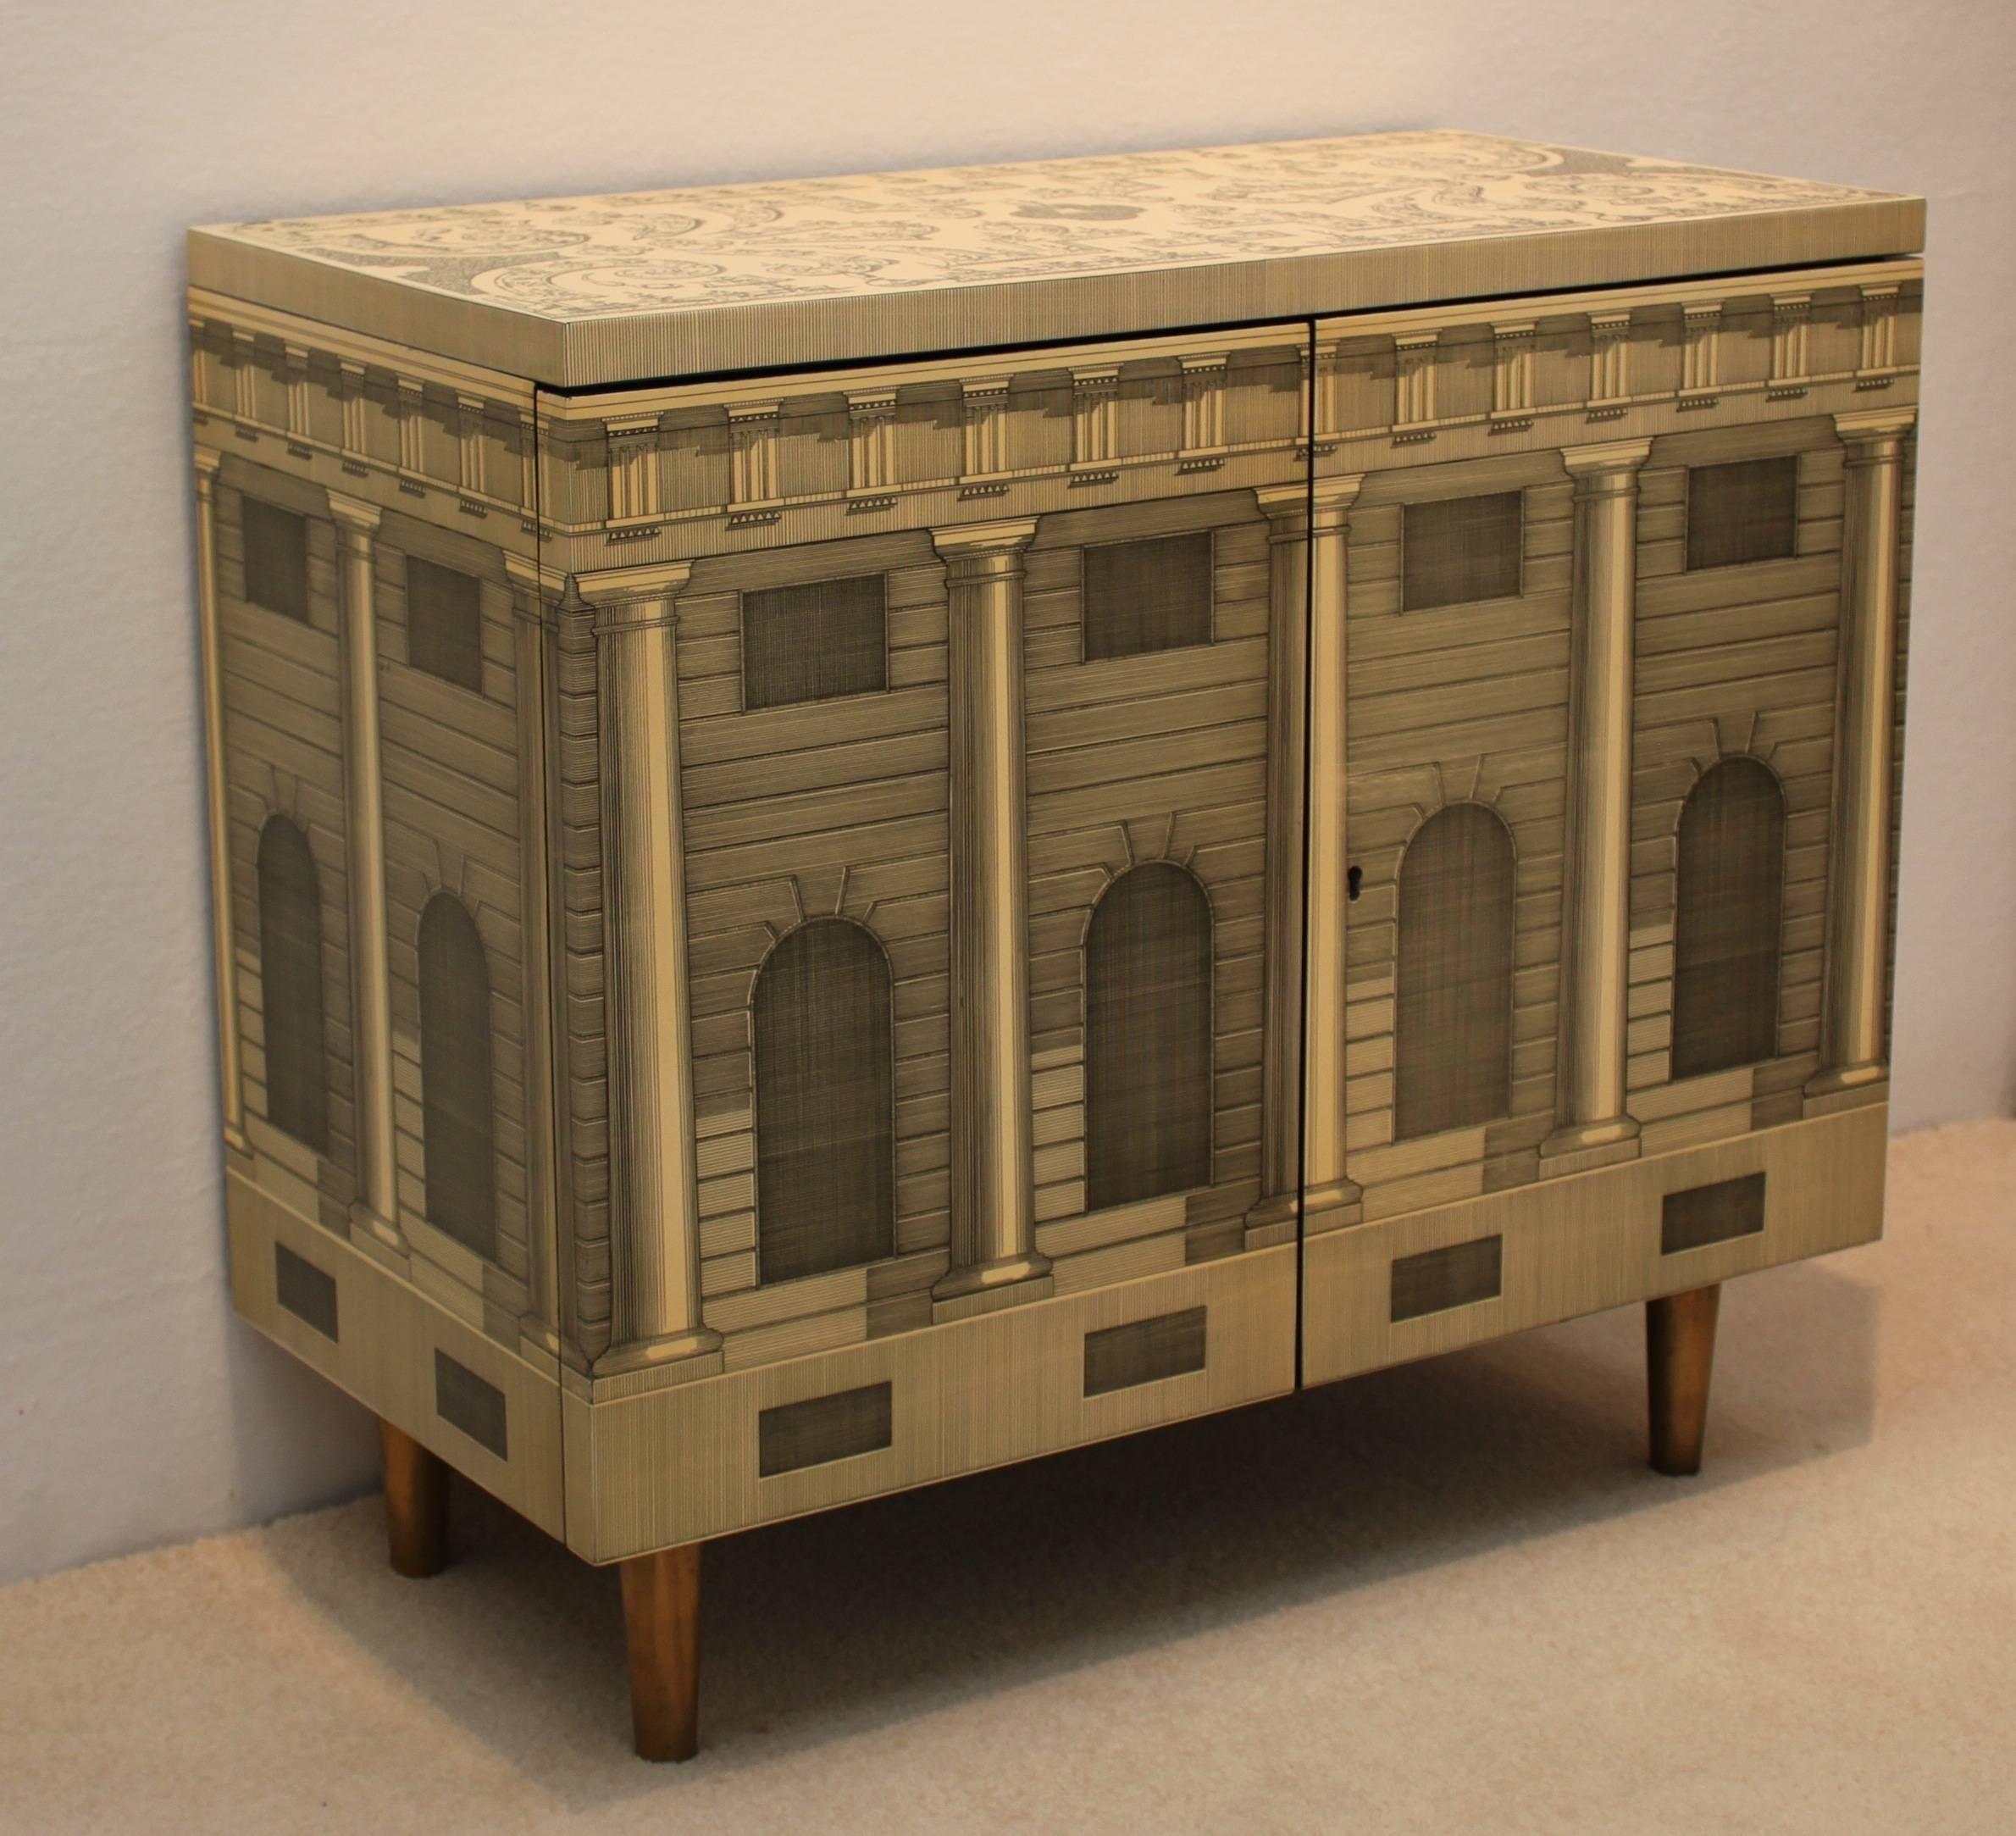 Mid-Century Modern 'Architettura' Cabinet by Fornasetti from 1950s